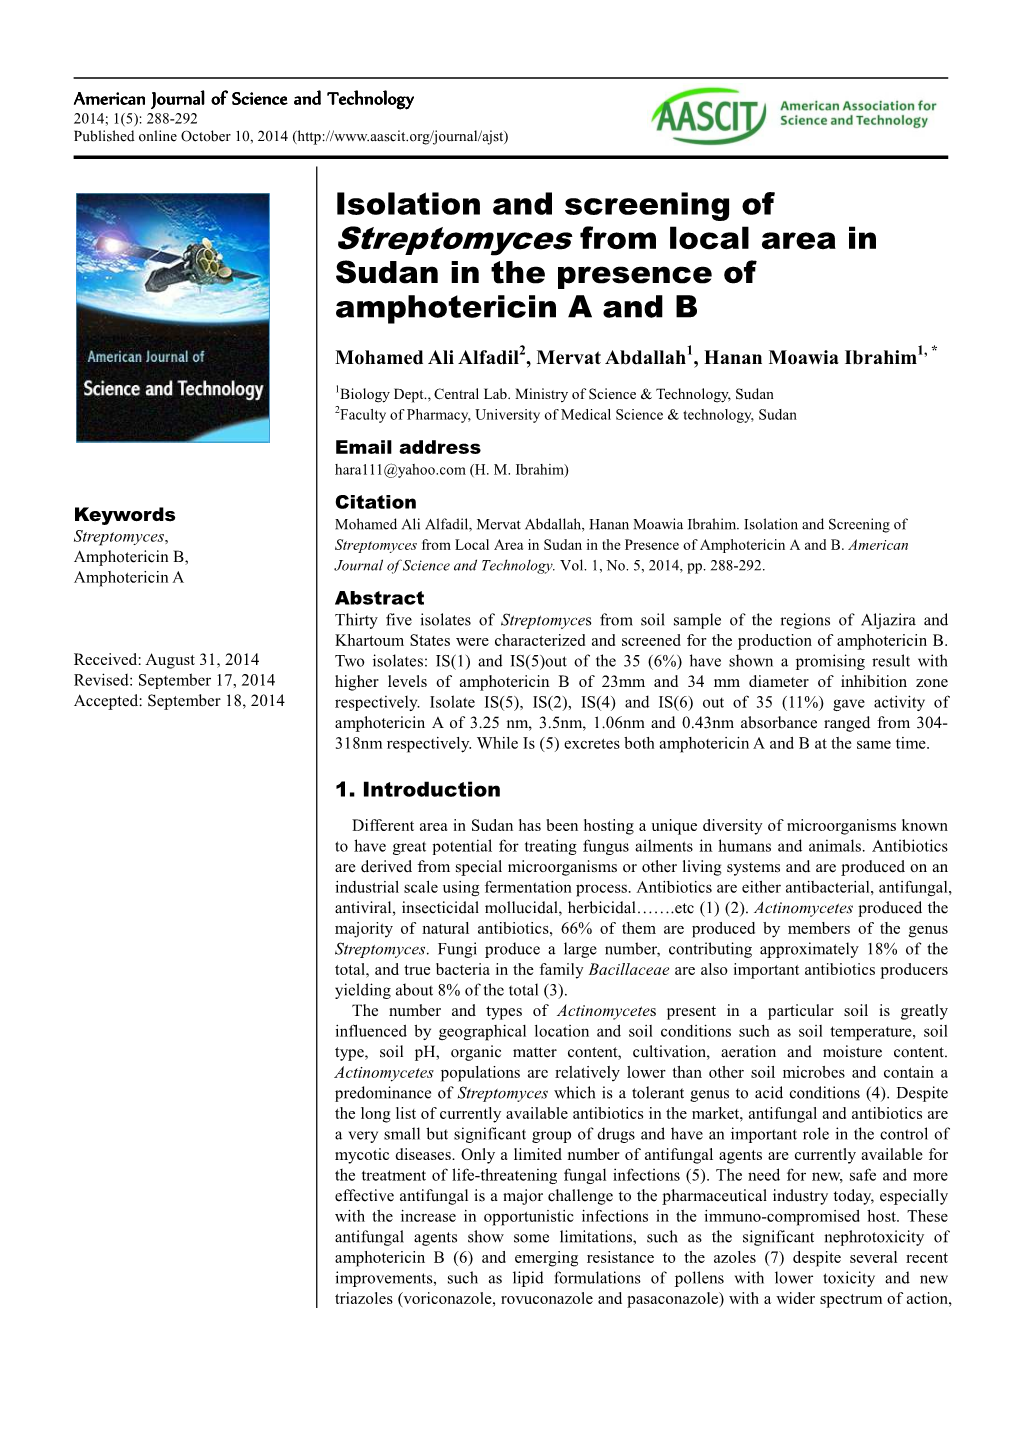 Isolation and Screening of Streptomyces from Local Area in Sudan in the Presence of Amphotericin a and B